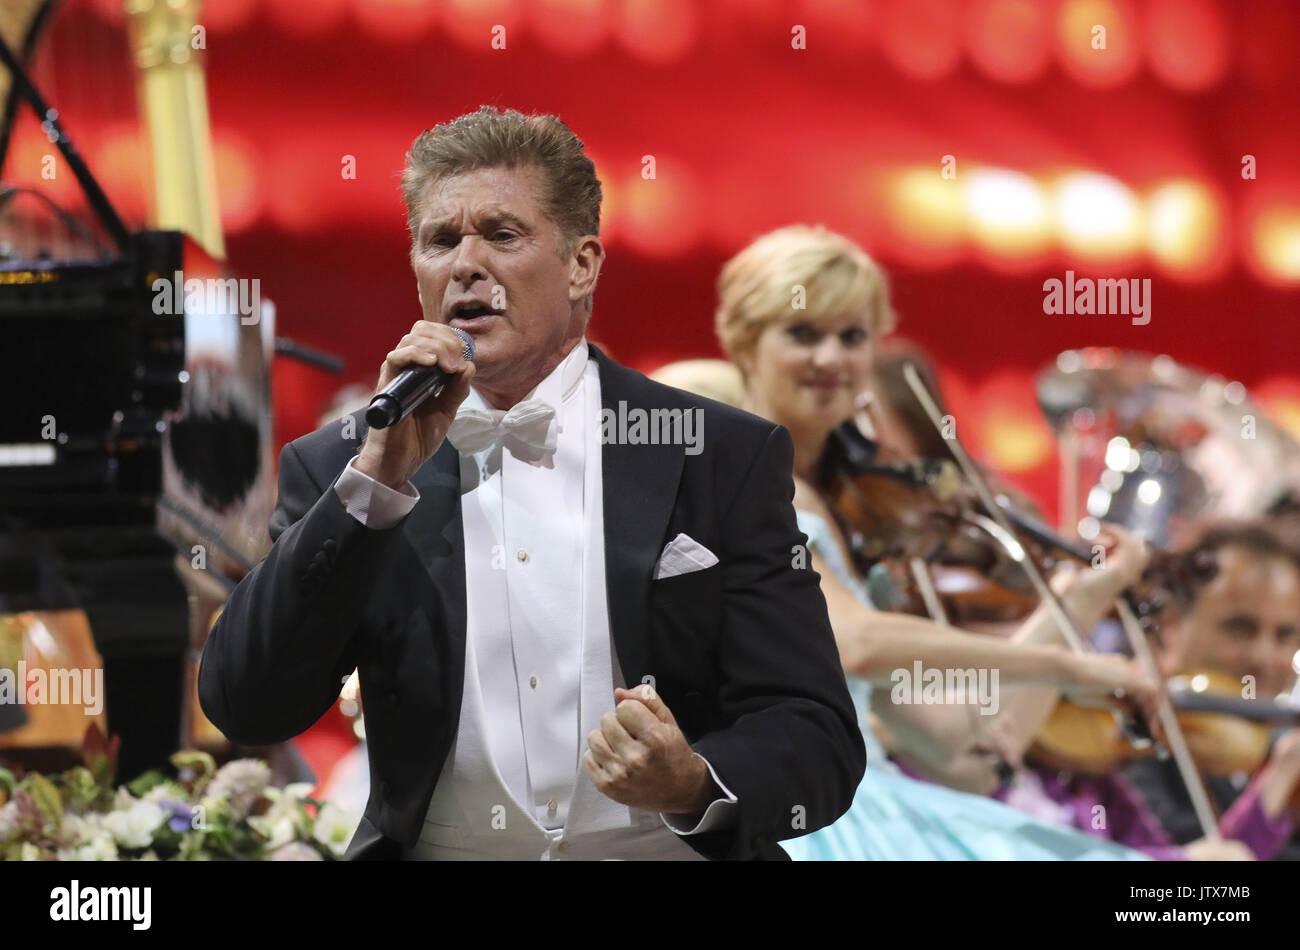 David Hasselhoff joins Andre Rieu on stage live from Vrifthof Square, in Maastricht, as part of his 30th Anniversary with the Johann Strauss Orchestra  Featuring: David Hasselhoff Where: Maastricht, Netherlands When: 09 Jul 2017 Credit: WENN.com  **Only available for publication in UK, USA, Germany, Austria, Switzerland** Stock Photo